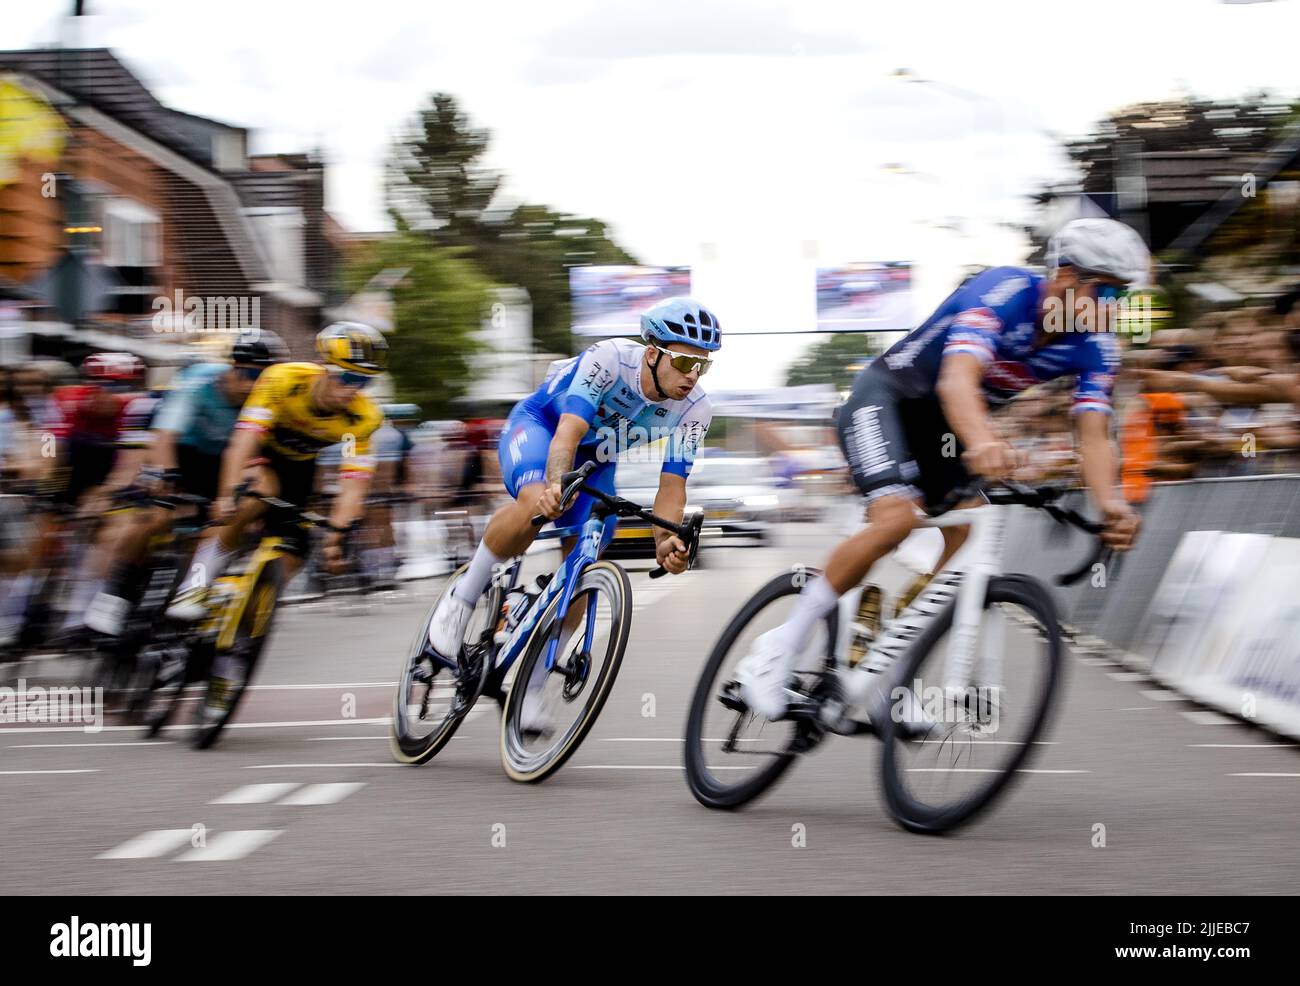 BOXMEER - Netherlands2022-07-25 20:26:46 BOXMEER - Dylan Groenewegen (M) during Days after the Tour. With the exception of the injured Steven Kruijswijk, all Dutch riders who are active this year in the Tour de France will participate in the traditional professional criterion. ANP SEM VAN DER WAL netherlands out - belgium out Stock Photo